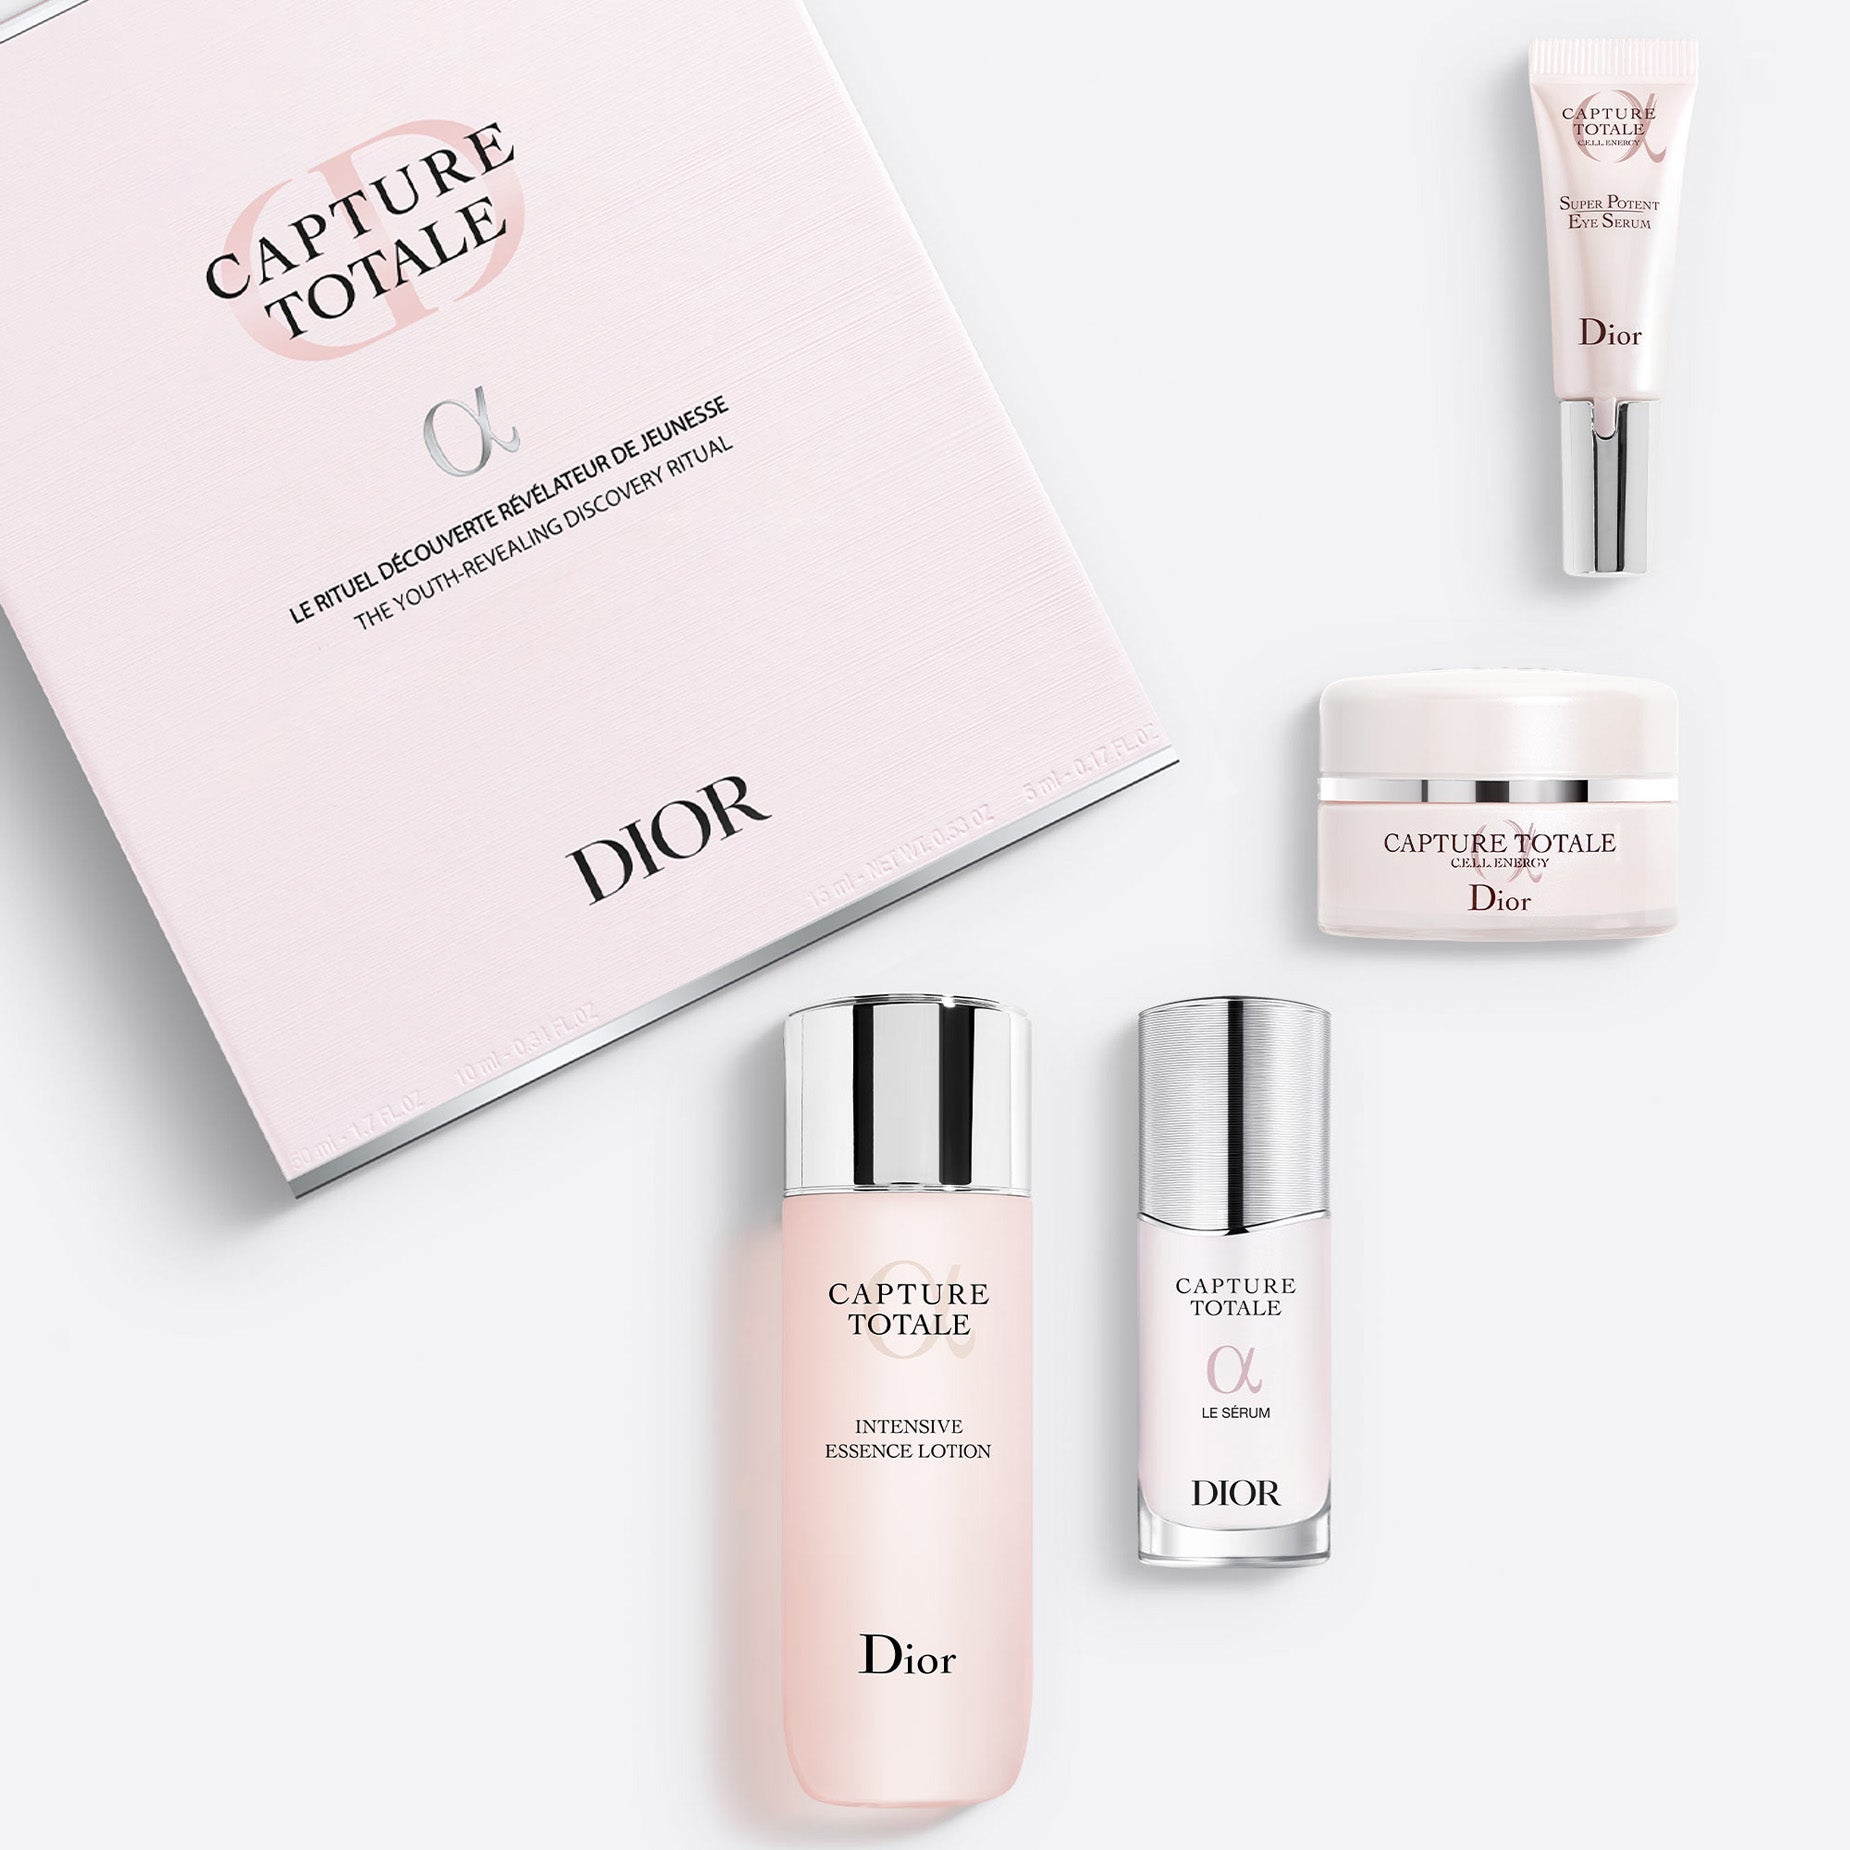 CAPTURE TOTALE DISCOVERY SET  ~  The Youth-Revealing Discovery Ritual - Selection of 4 Firming Skincare Products